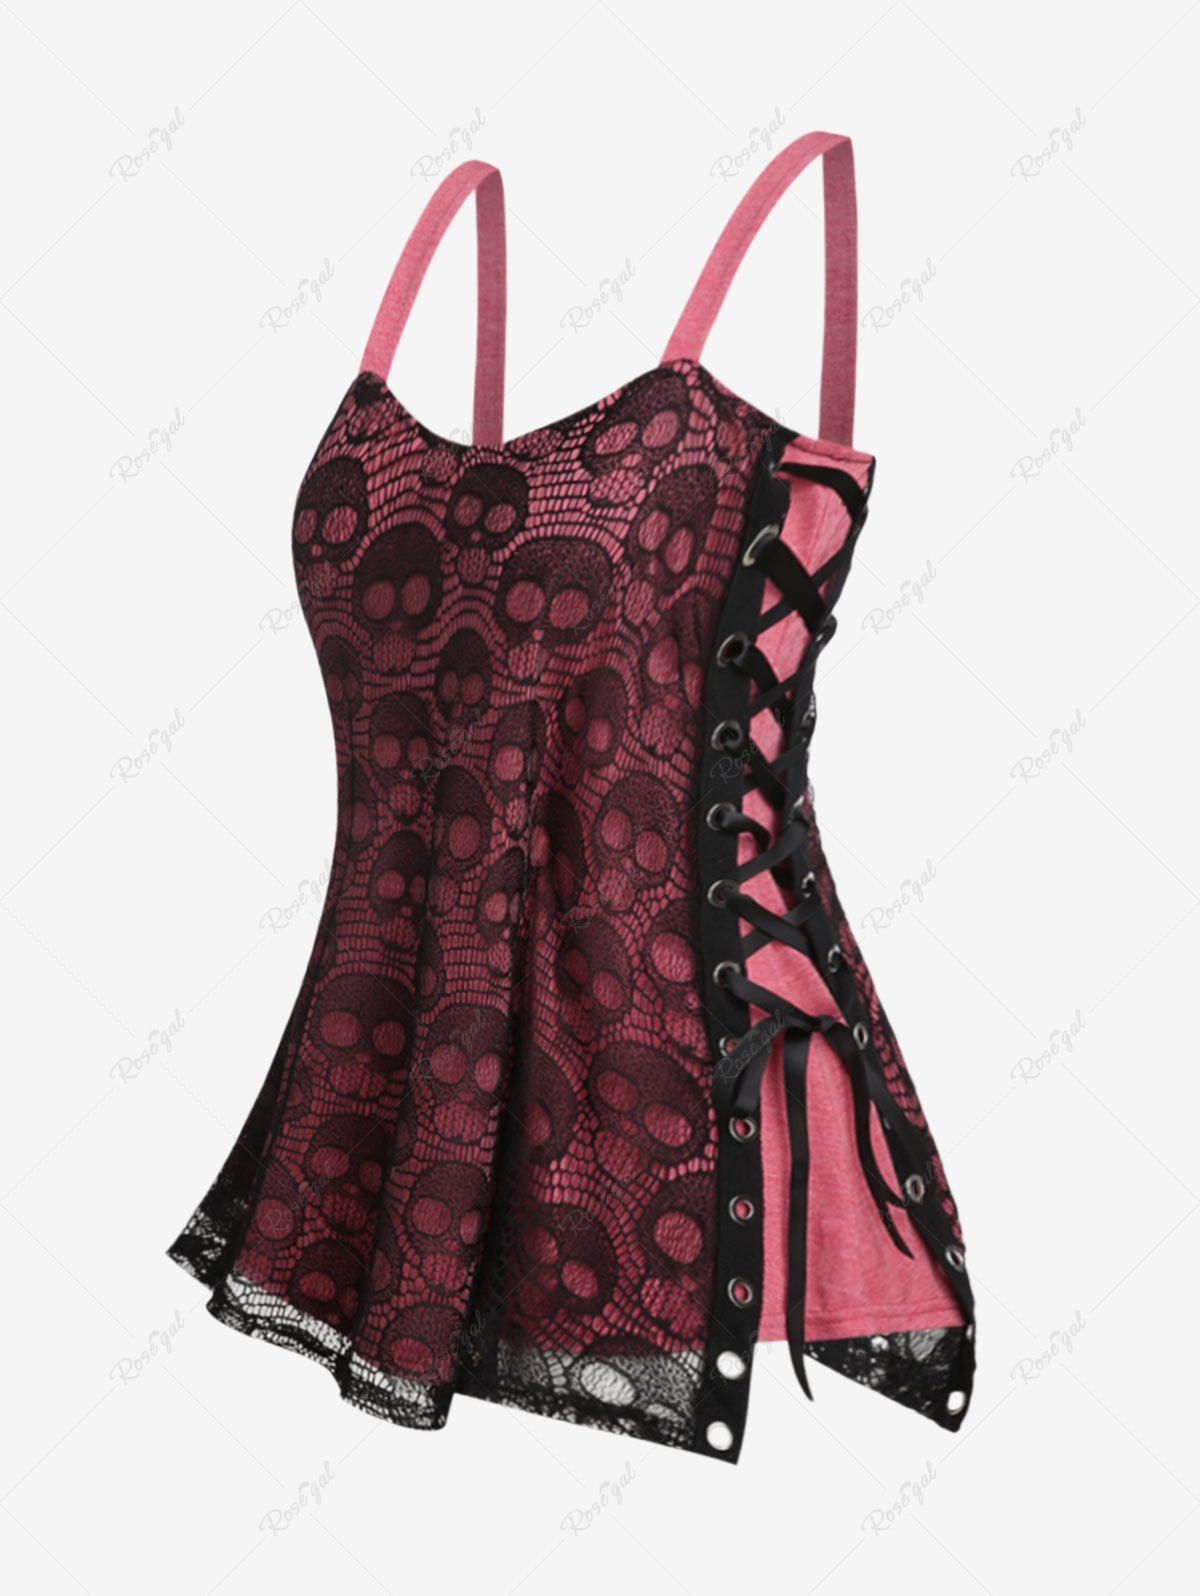 Sale Plus Size Skull Lace Overlay Gothic Tank Top  